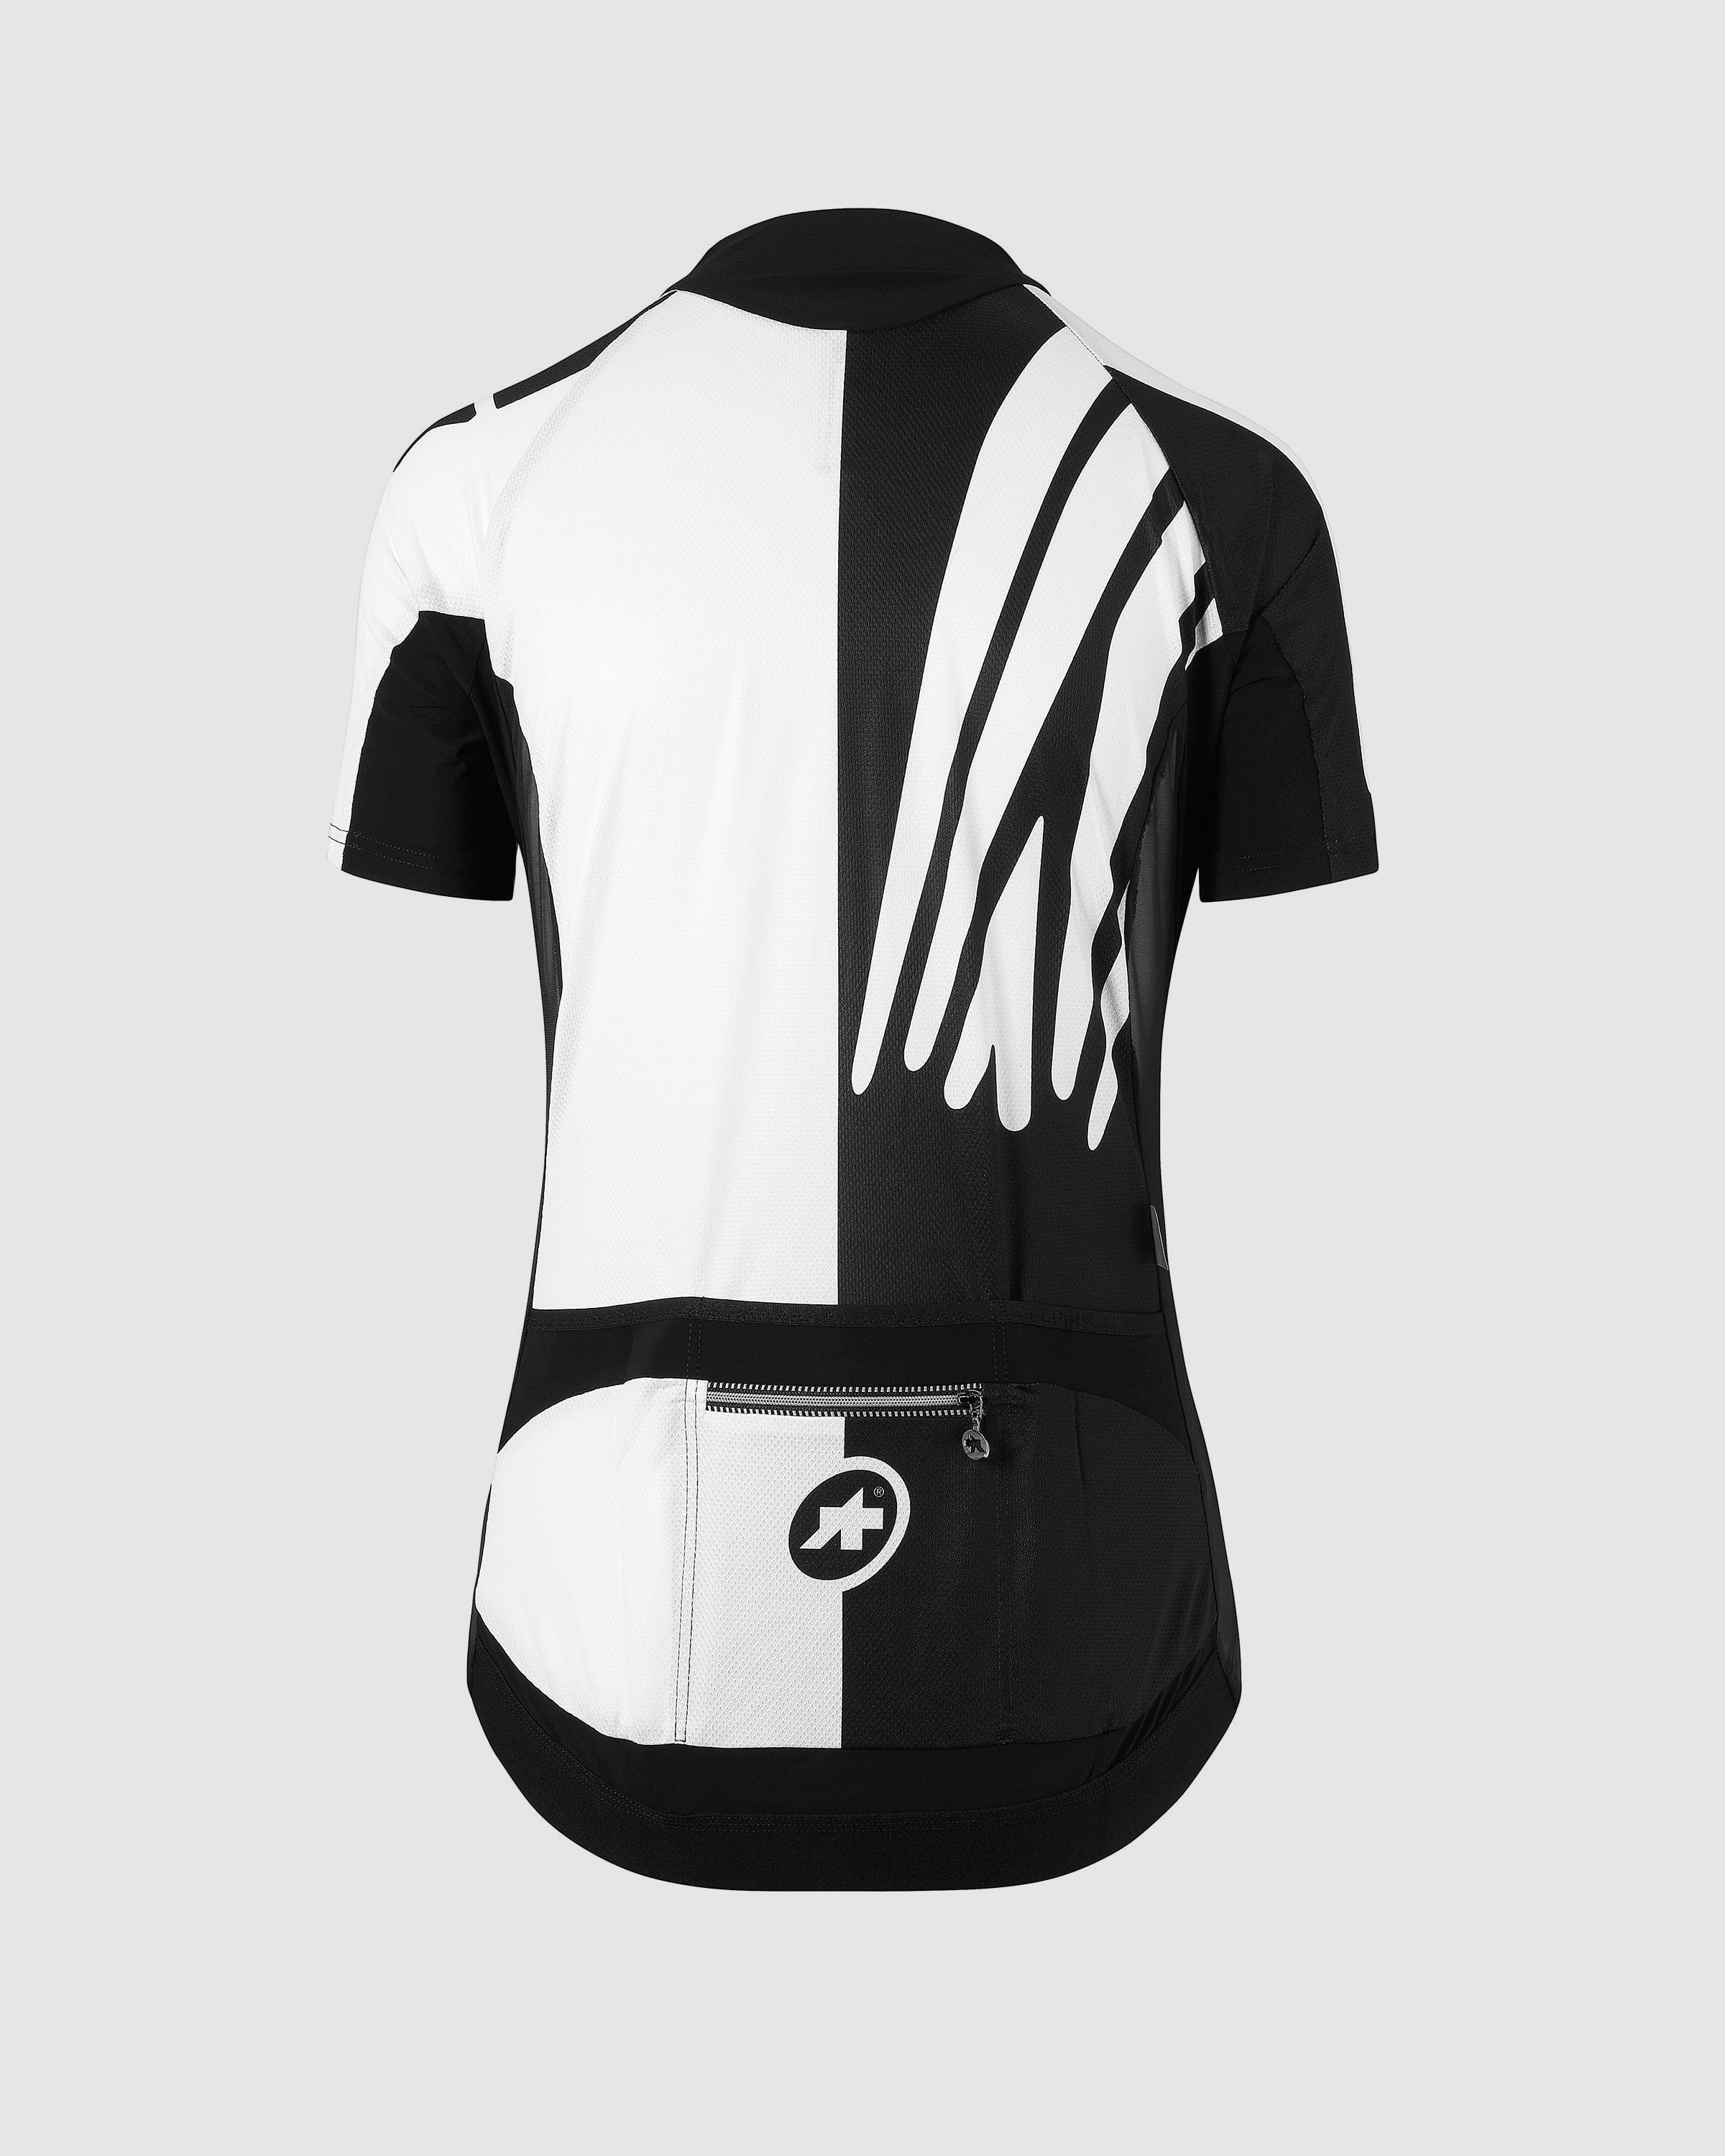 SS.capeepicXCJersey_evo7 Lady - ASSOS Of Switzerland - Official Outlet